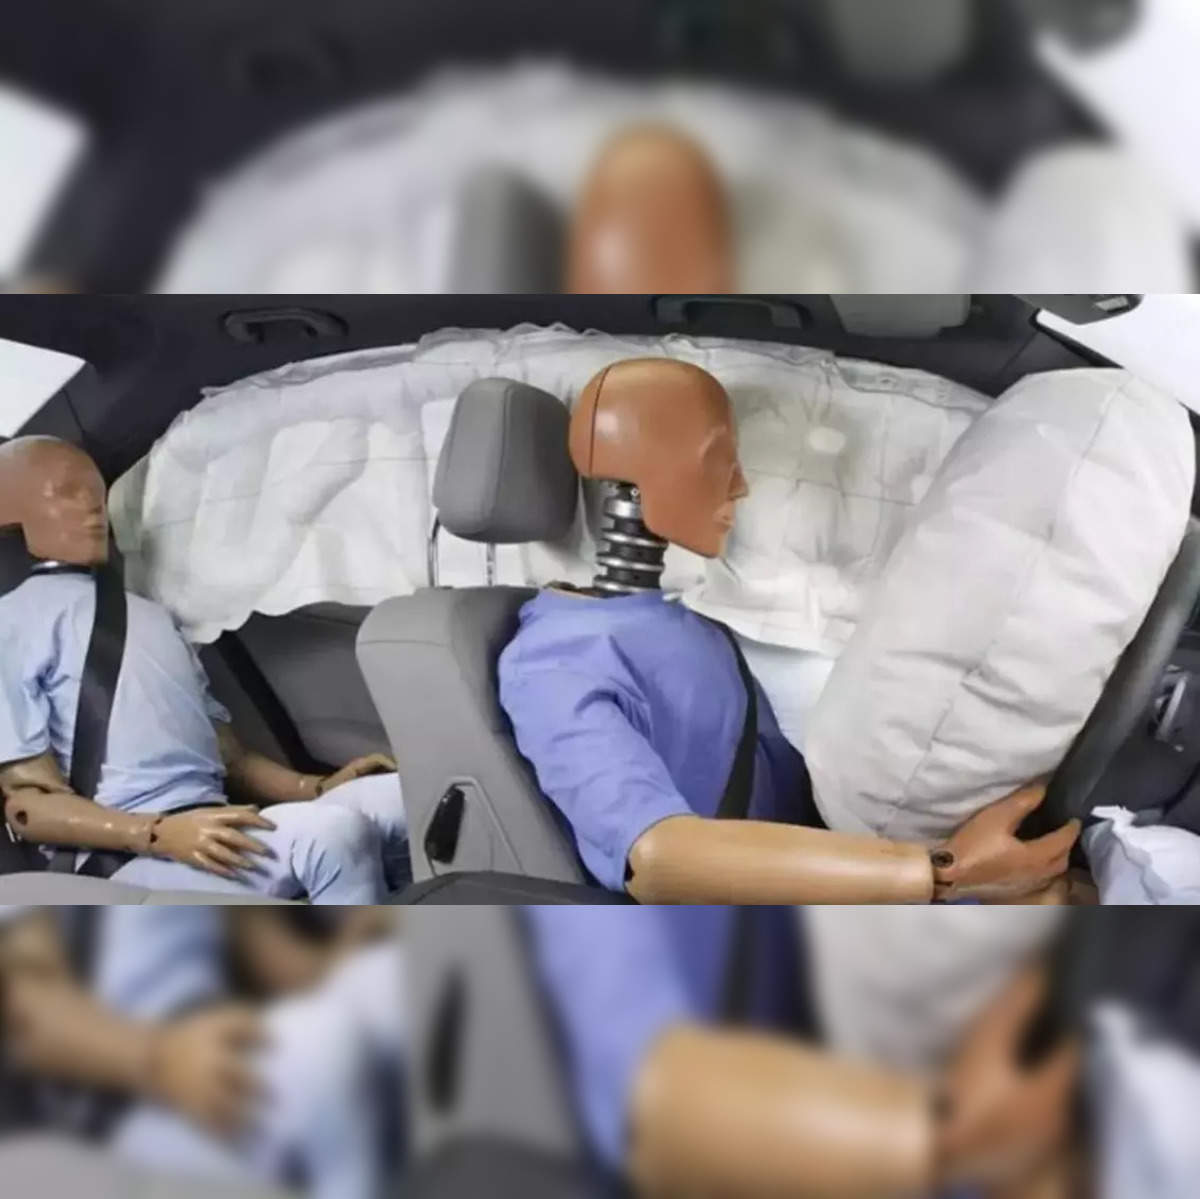 Indian Airbag Industry: Airbag firms pumped up to ramp up capacity